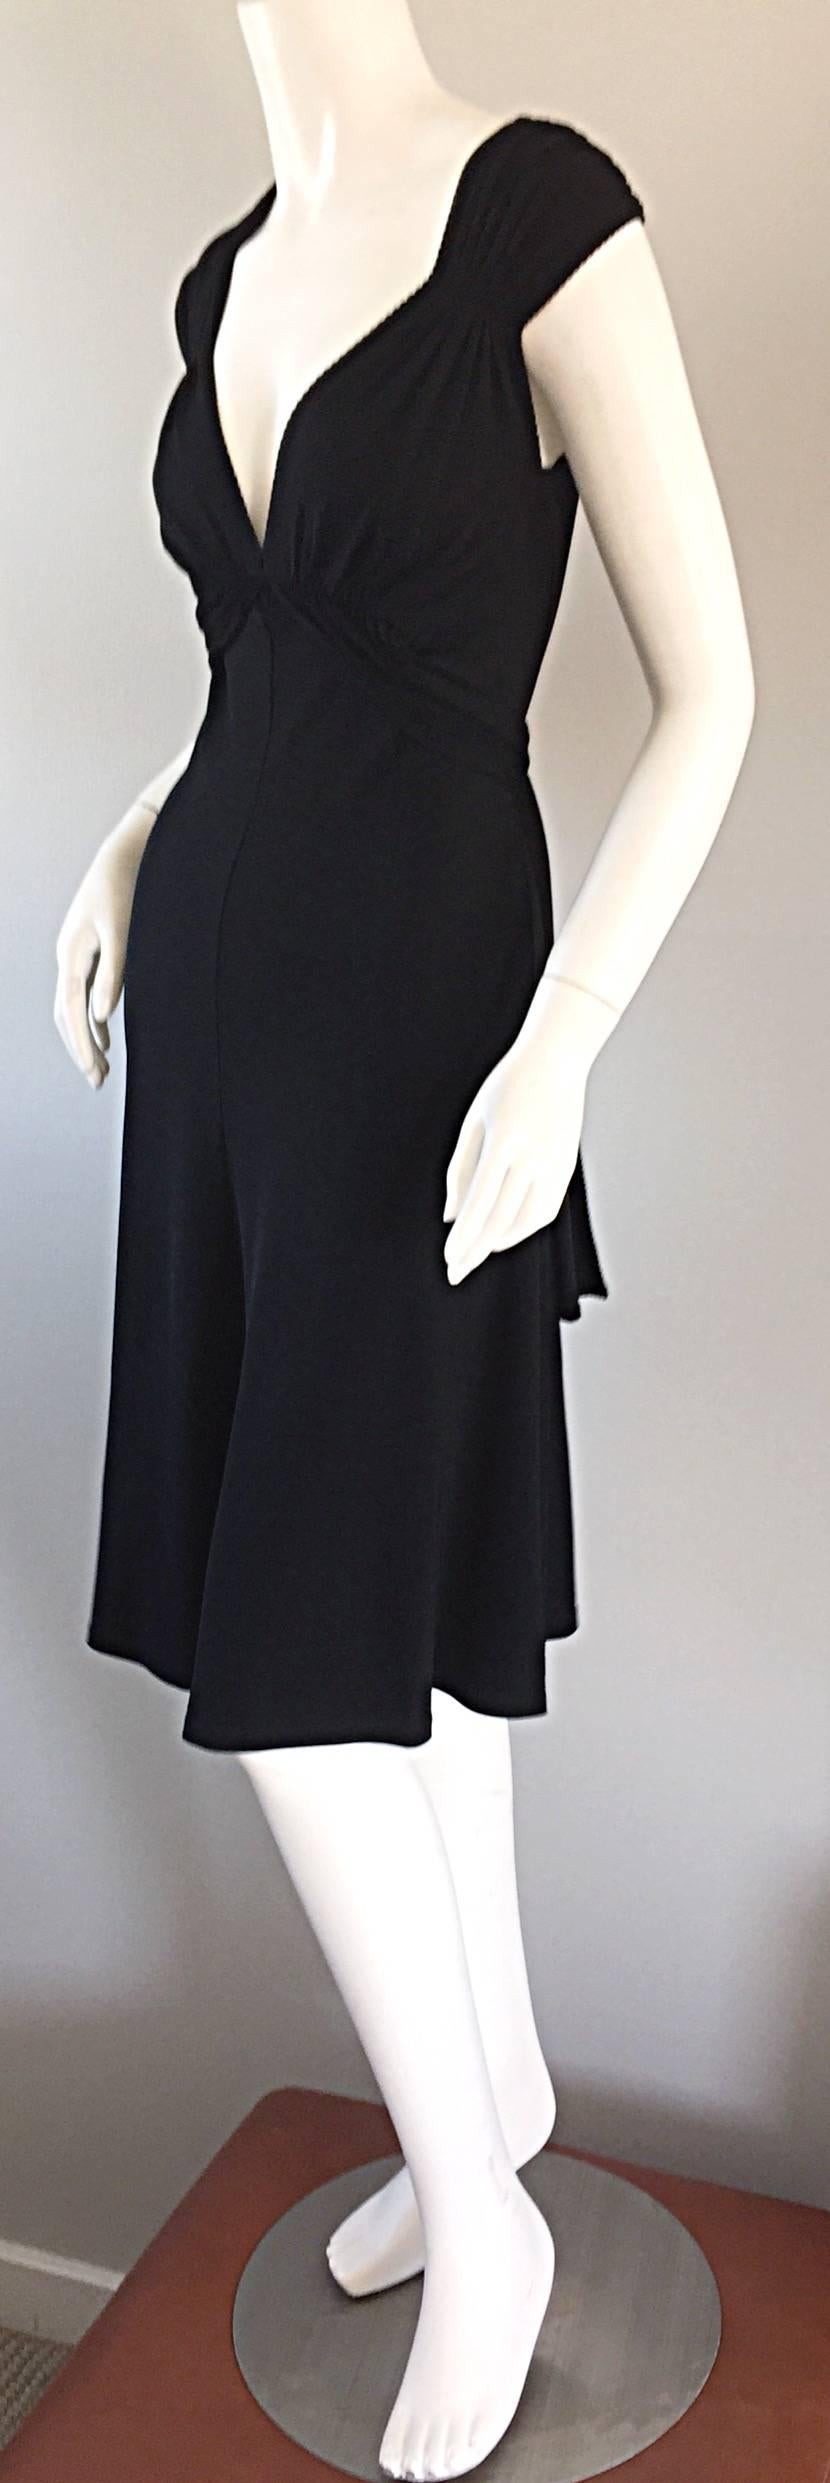 lbd with sleeves